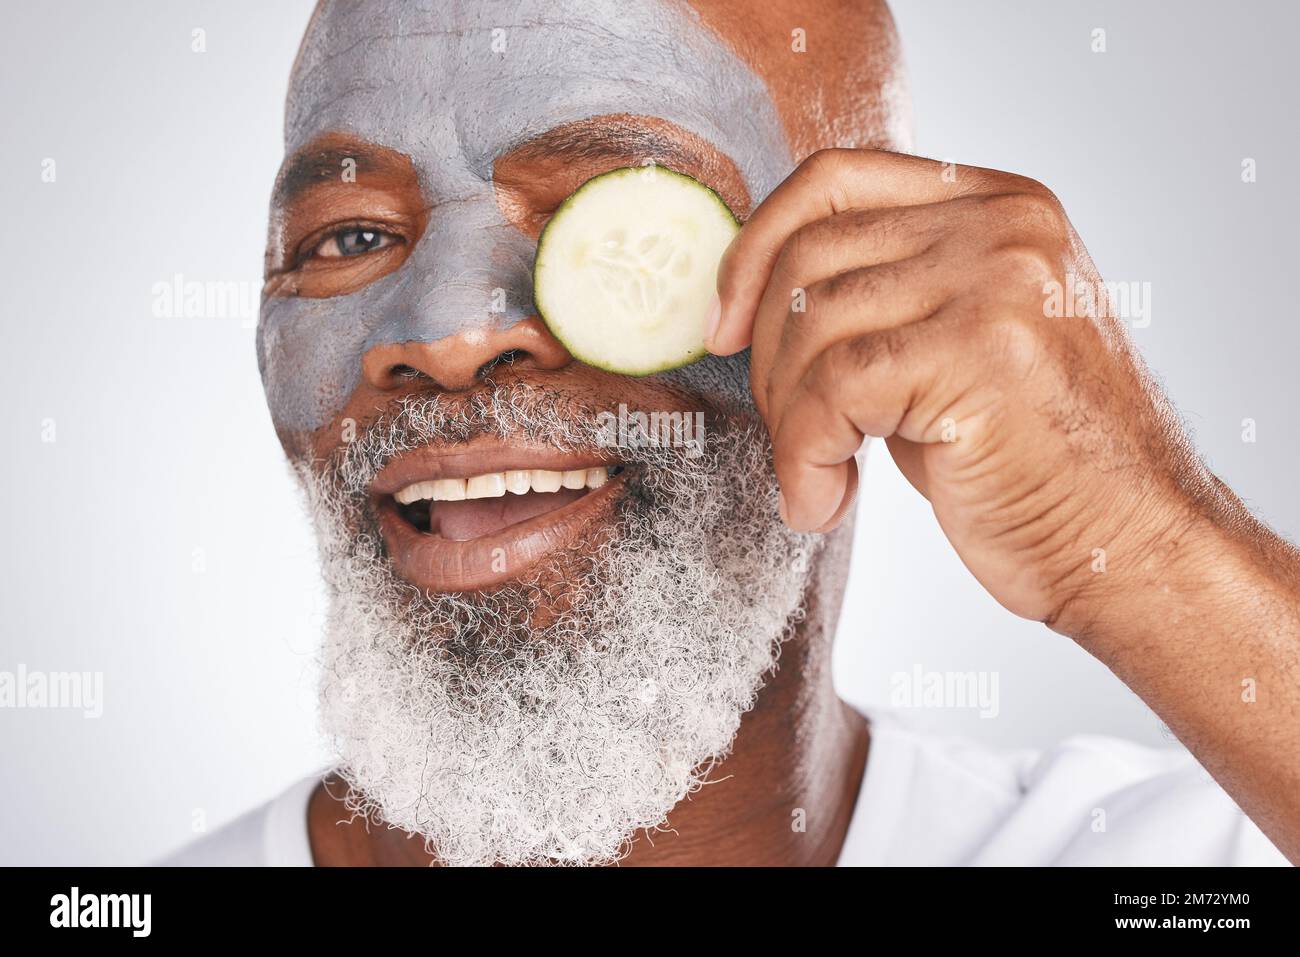 Skincare, face mask or old man portrait with cucumber marketing or advertising natural vegan diet for glowing skin. Cream, happy, senior black man Stock Photo